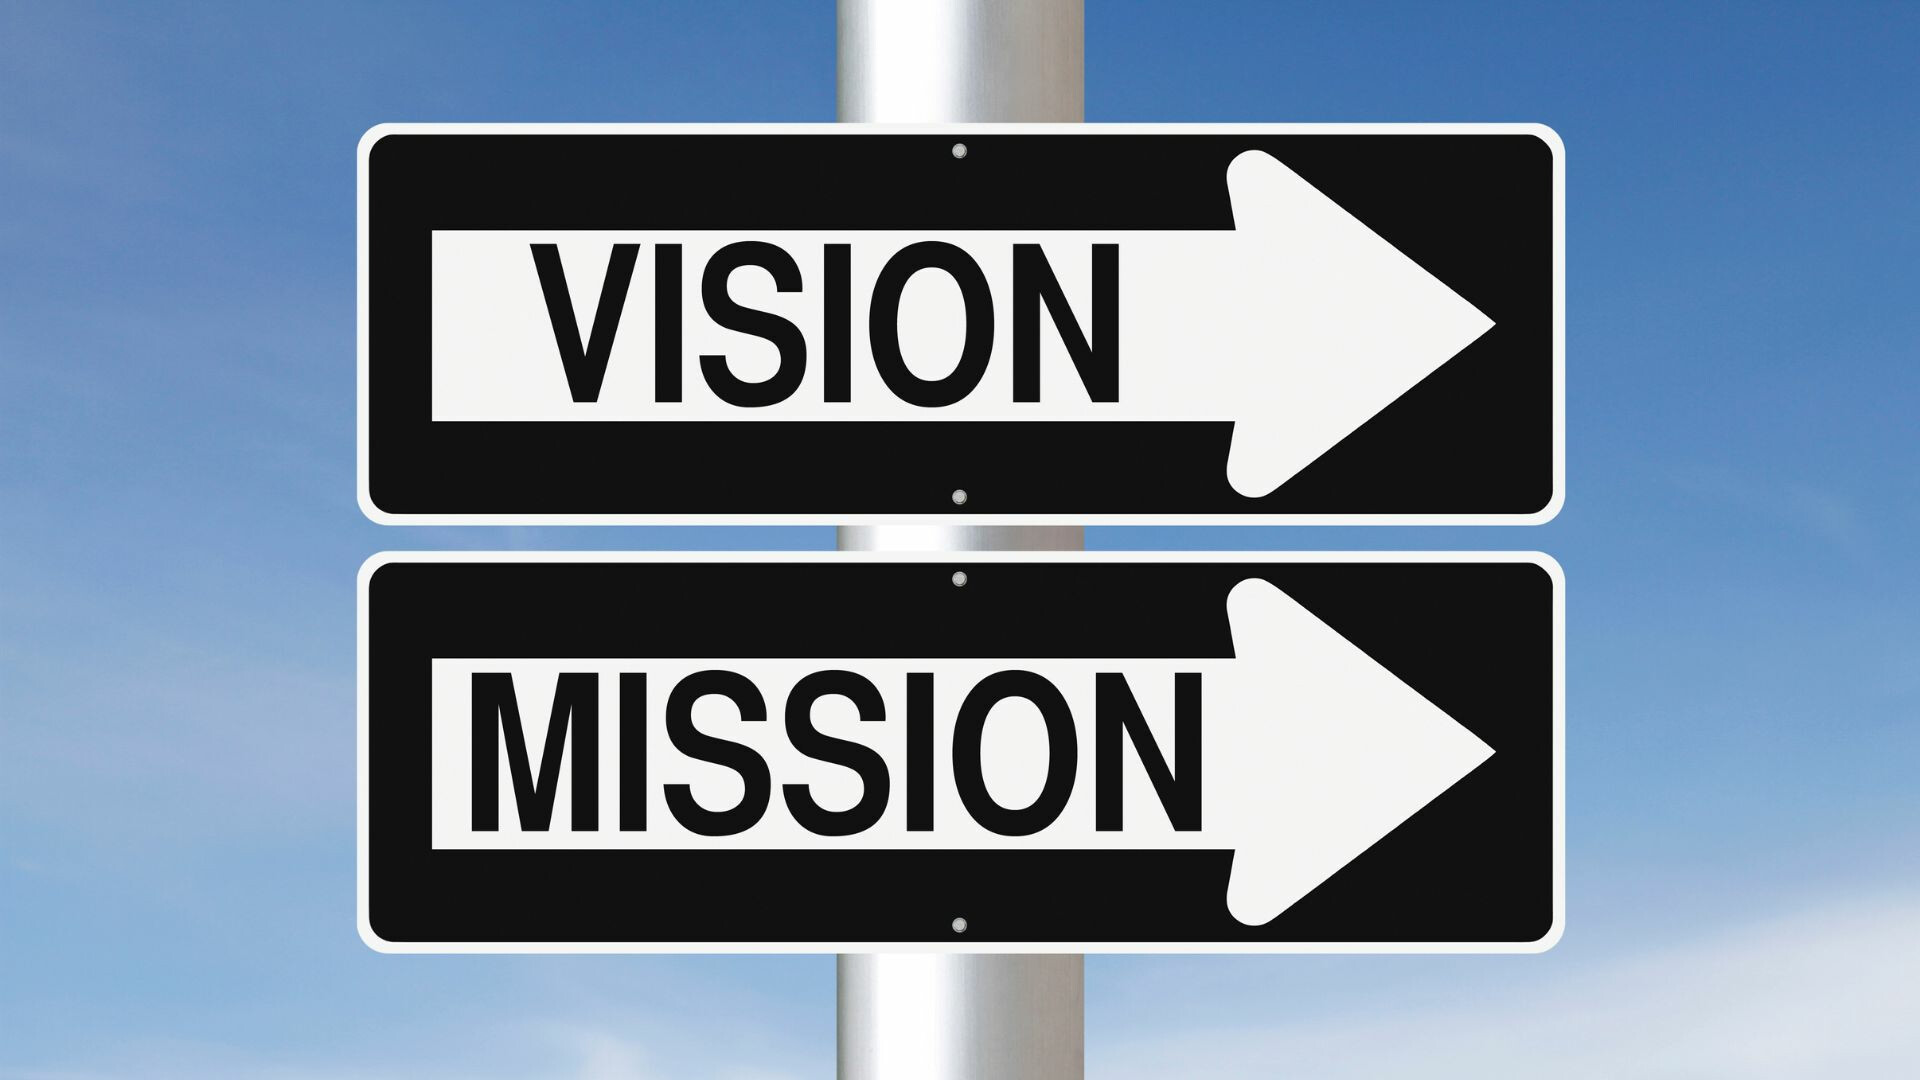 vision-mission-street-signs-future-concept